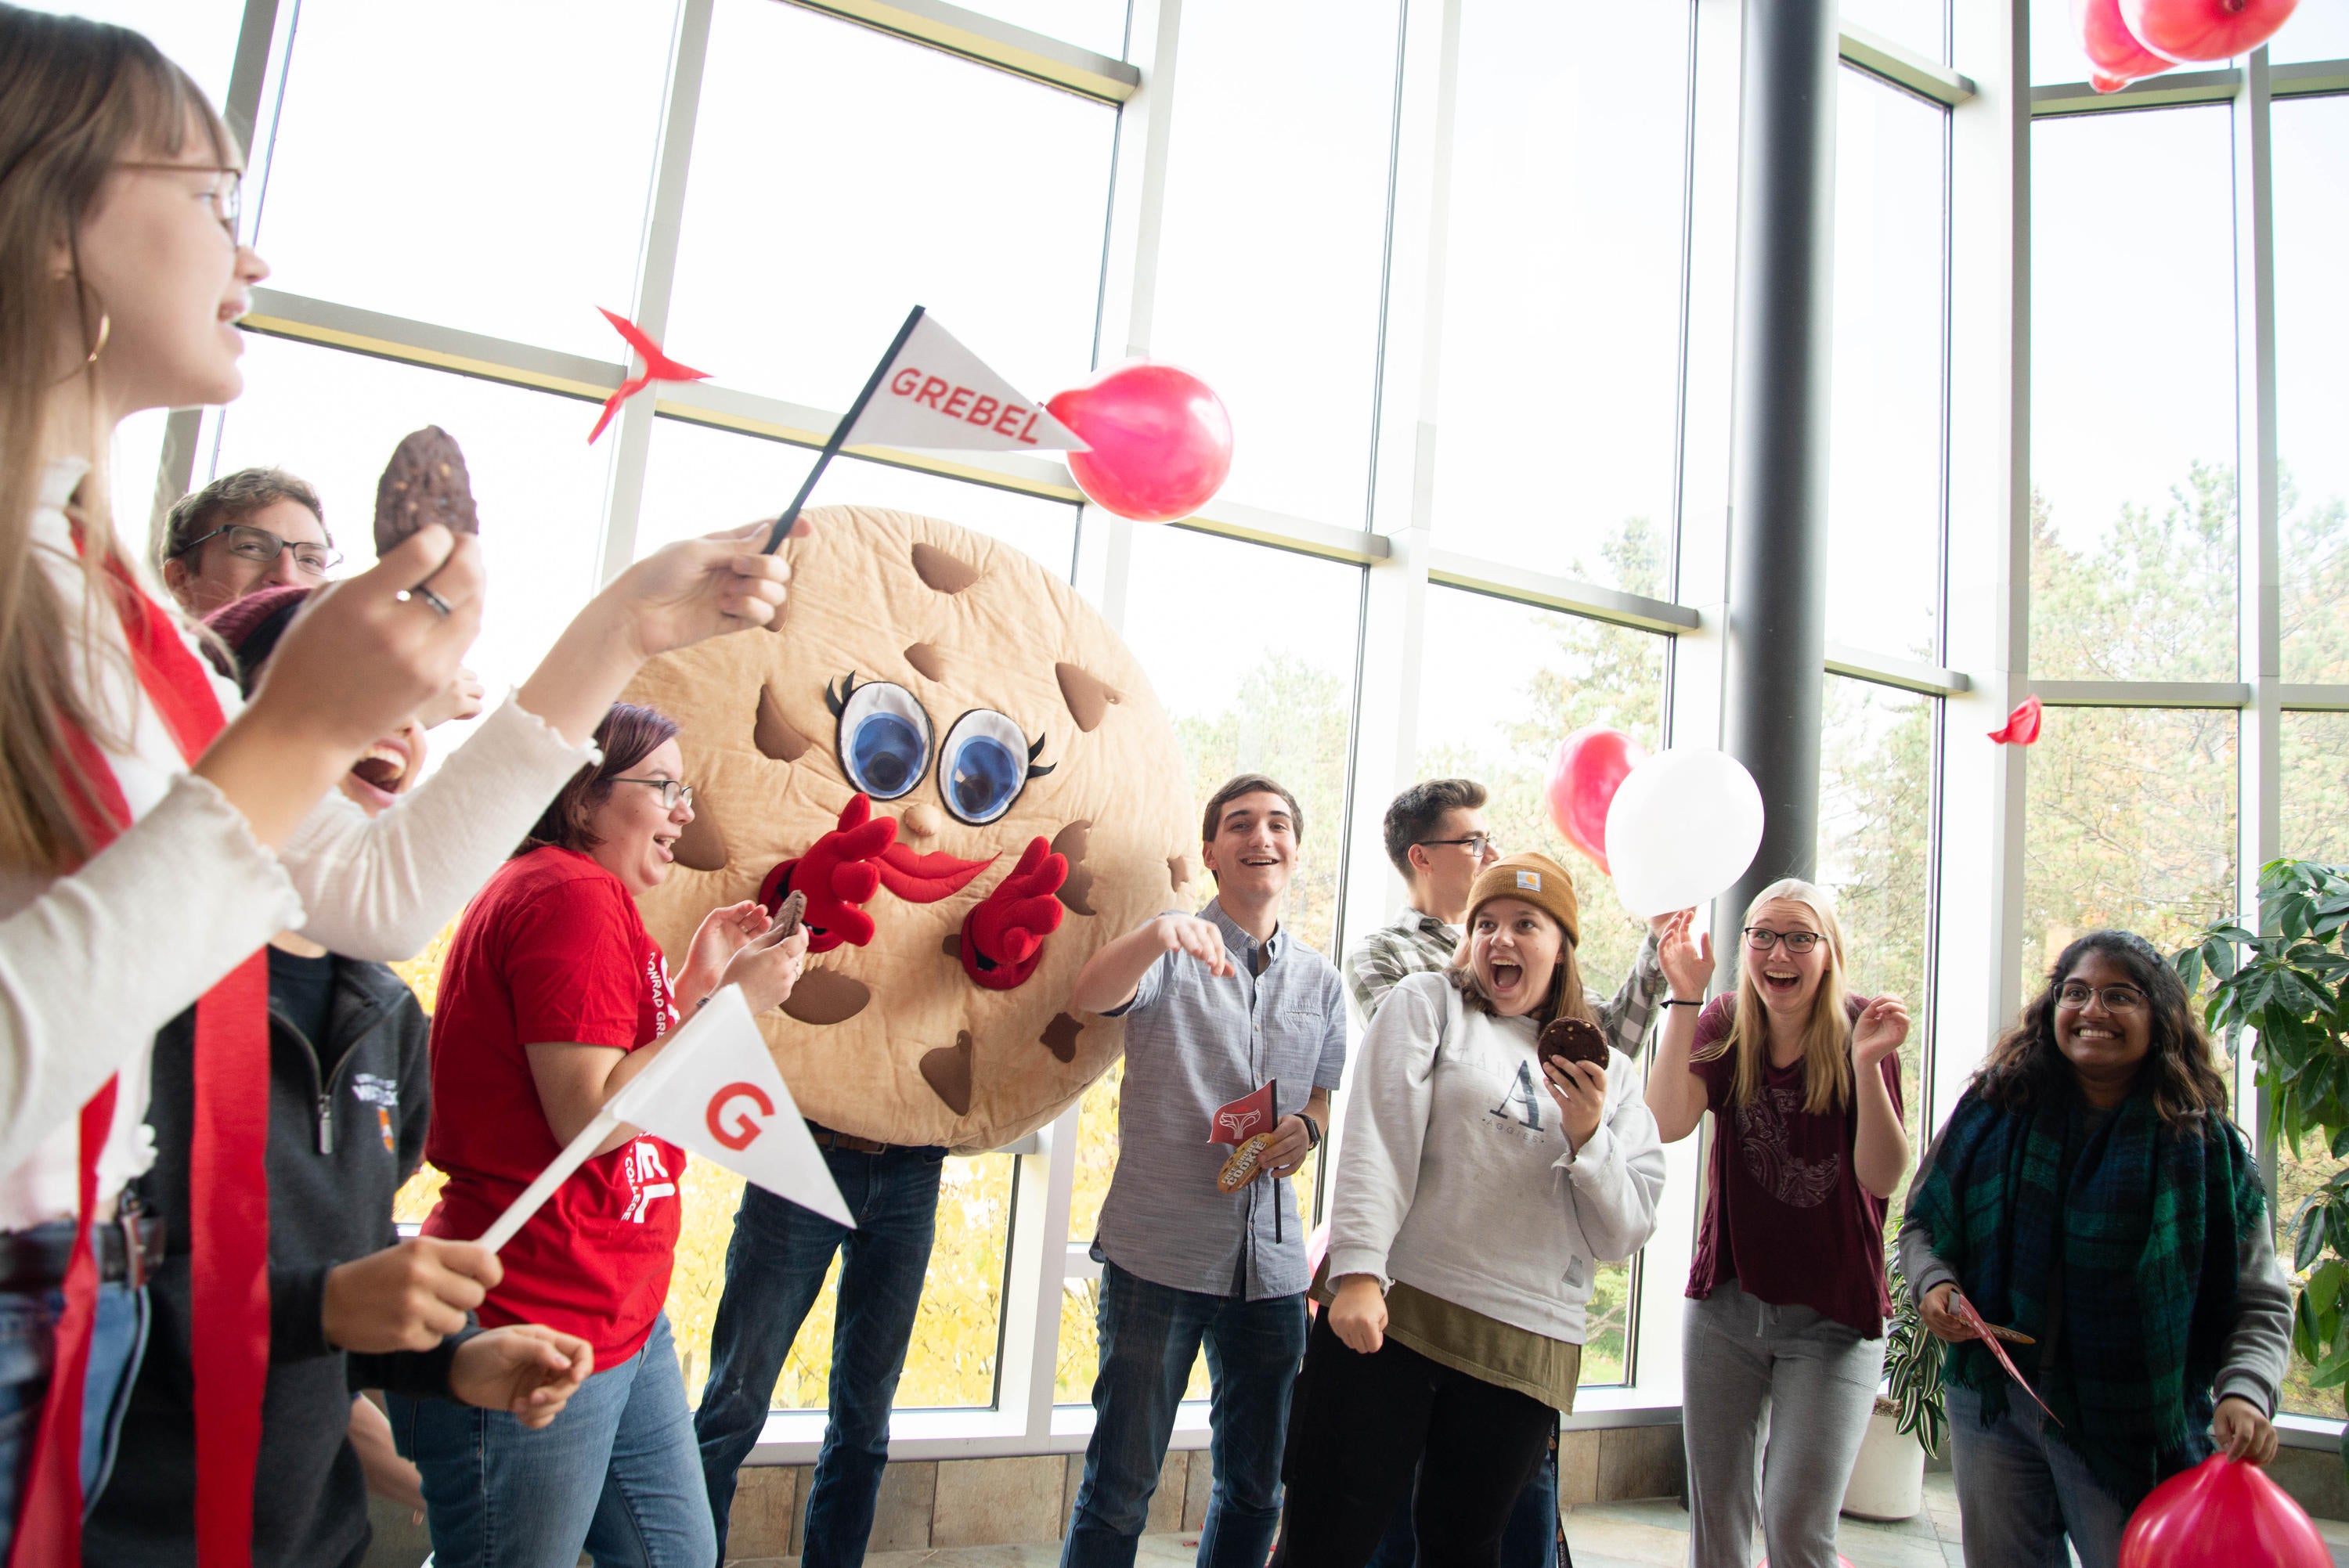 Picture of grebelites who are holding cookies and are dancing with the cookie mascot